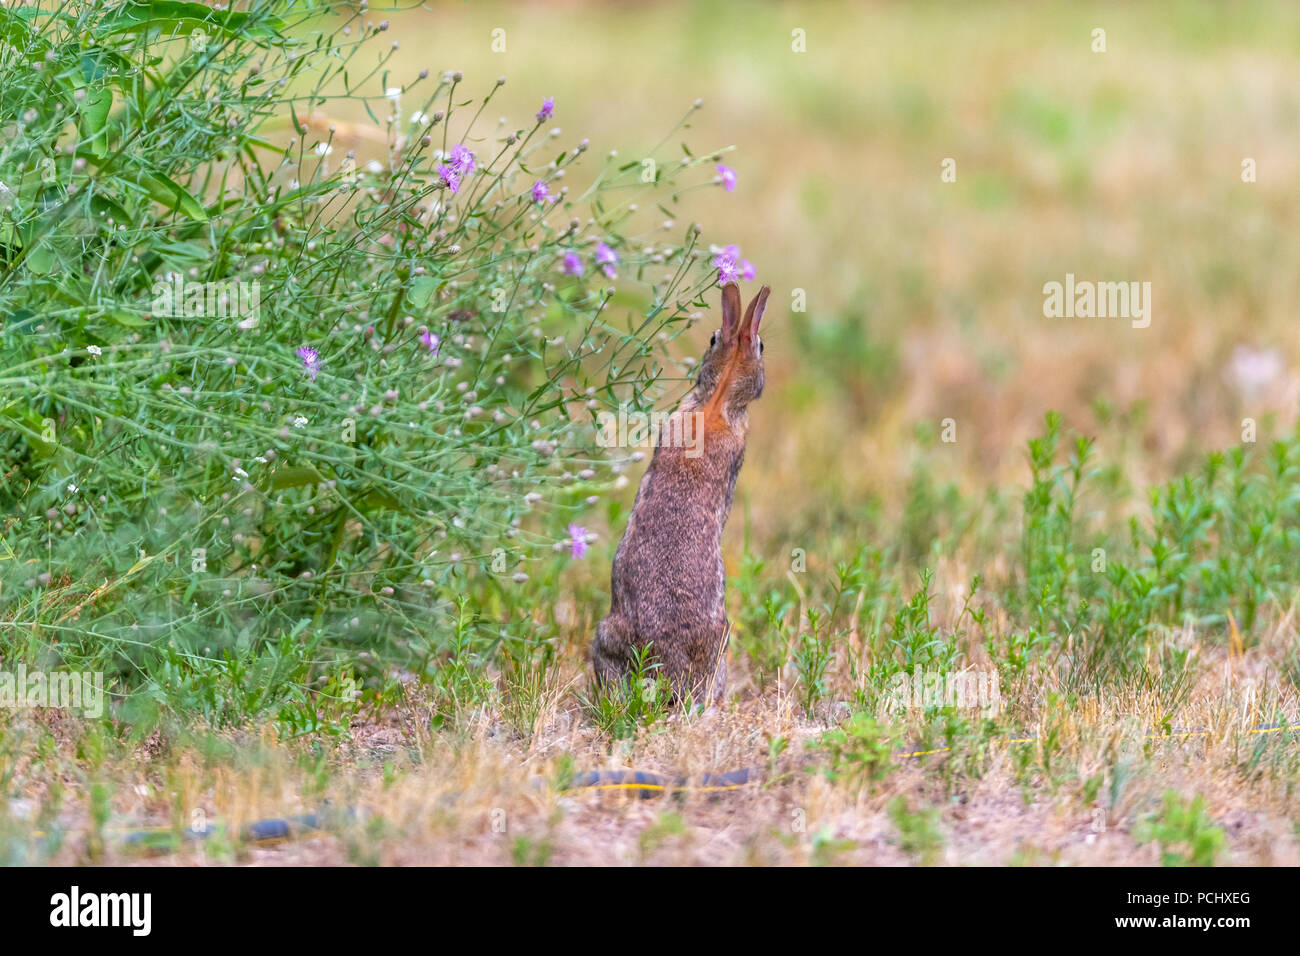 Eastern Cottontail Rabbit (Sylvilagus floridanus) photographed from behind showing how the placement of the eyes allow almost 360 degree vision. Stock Photo